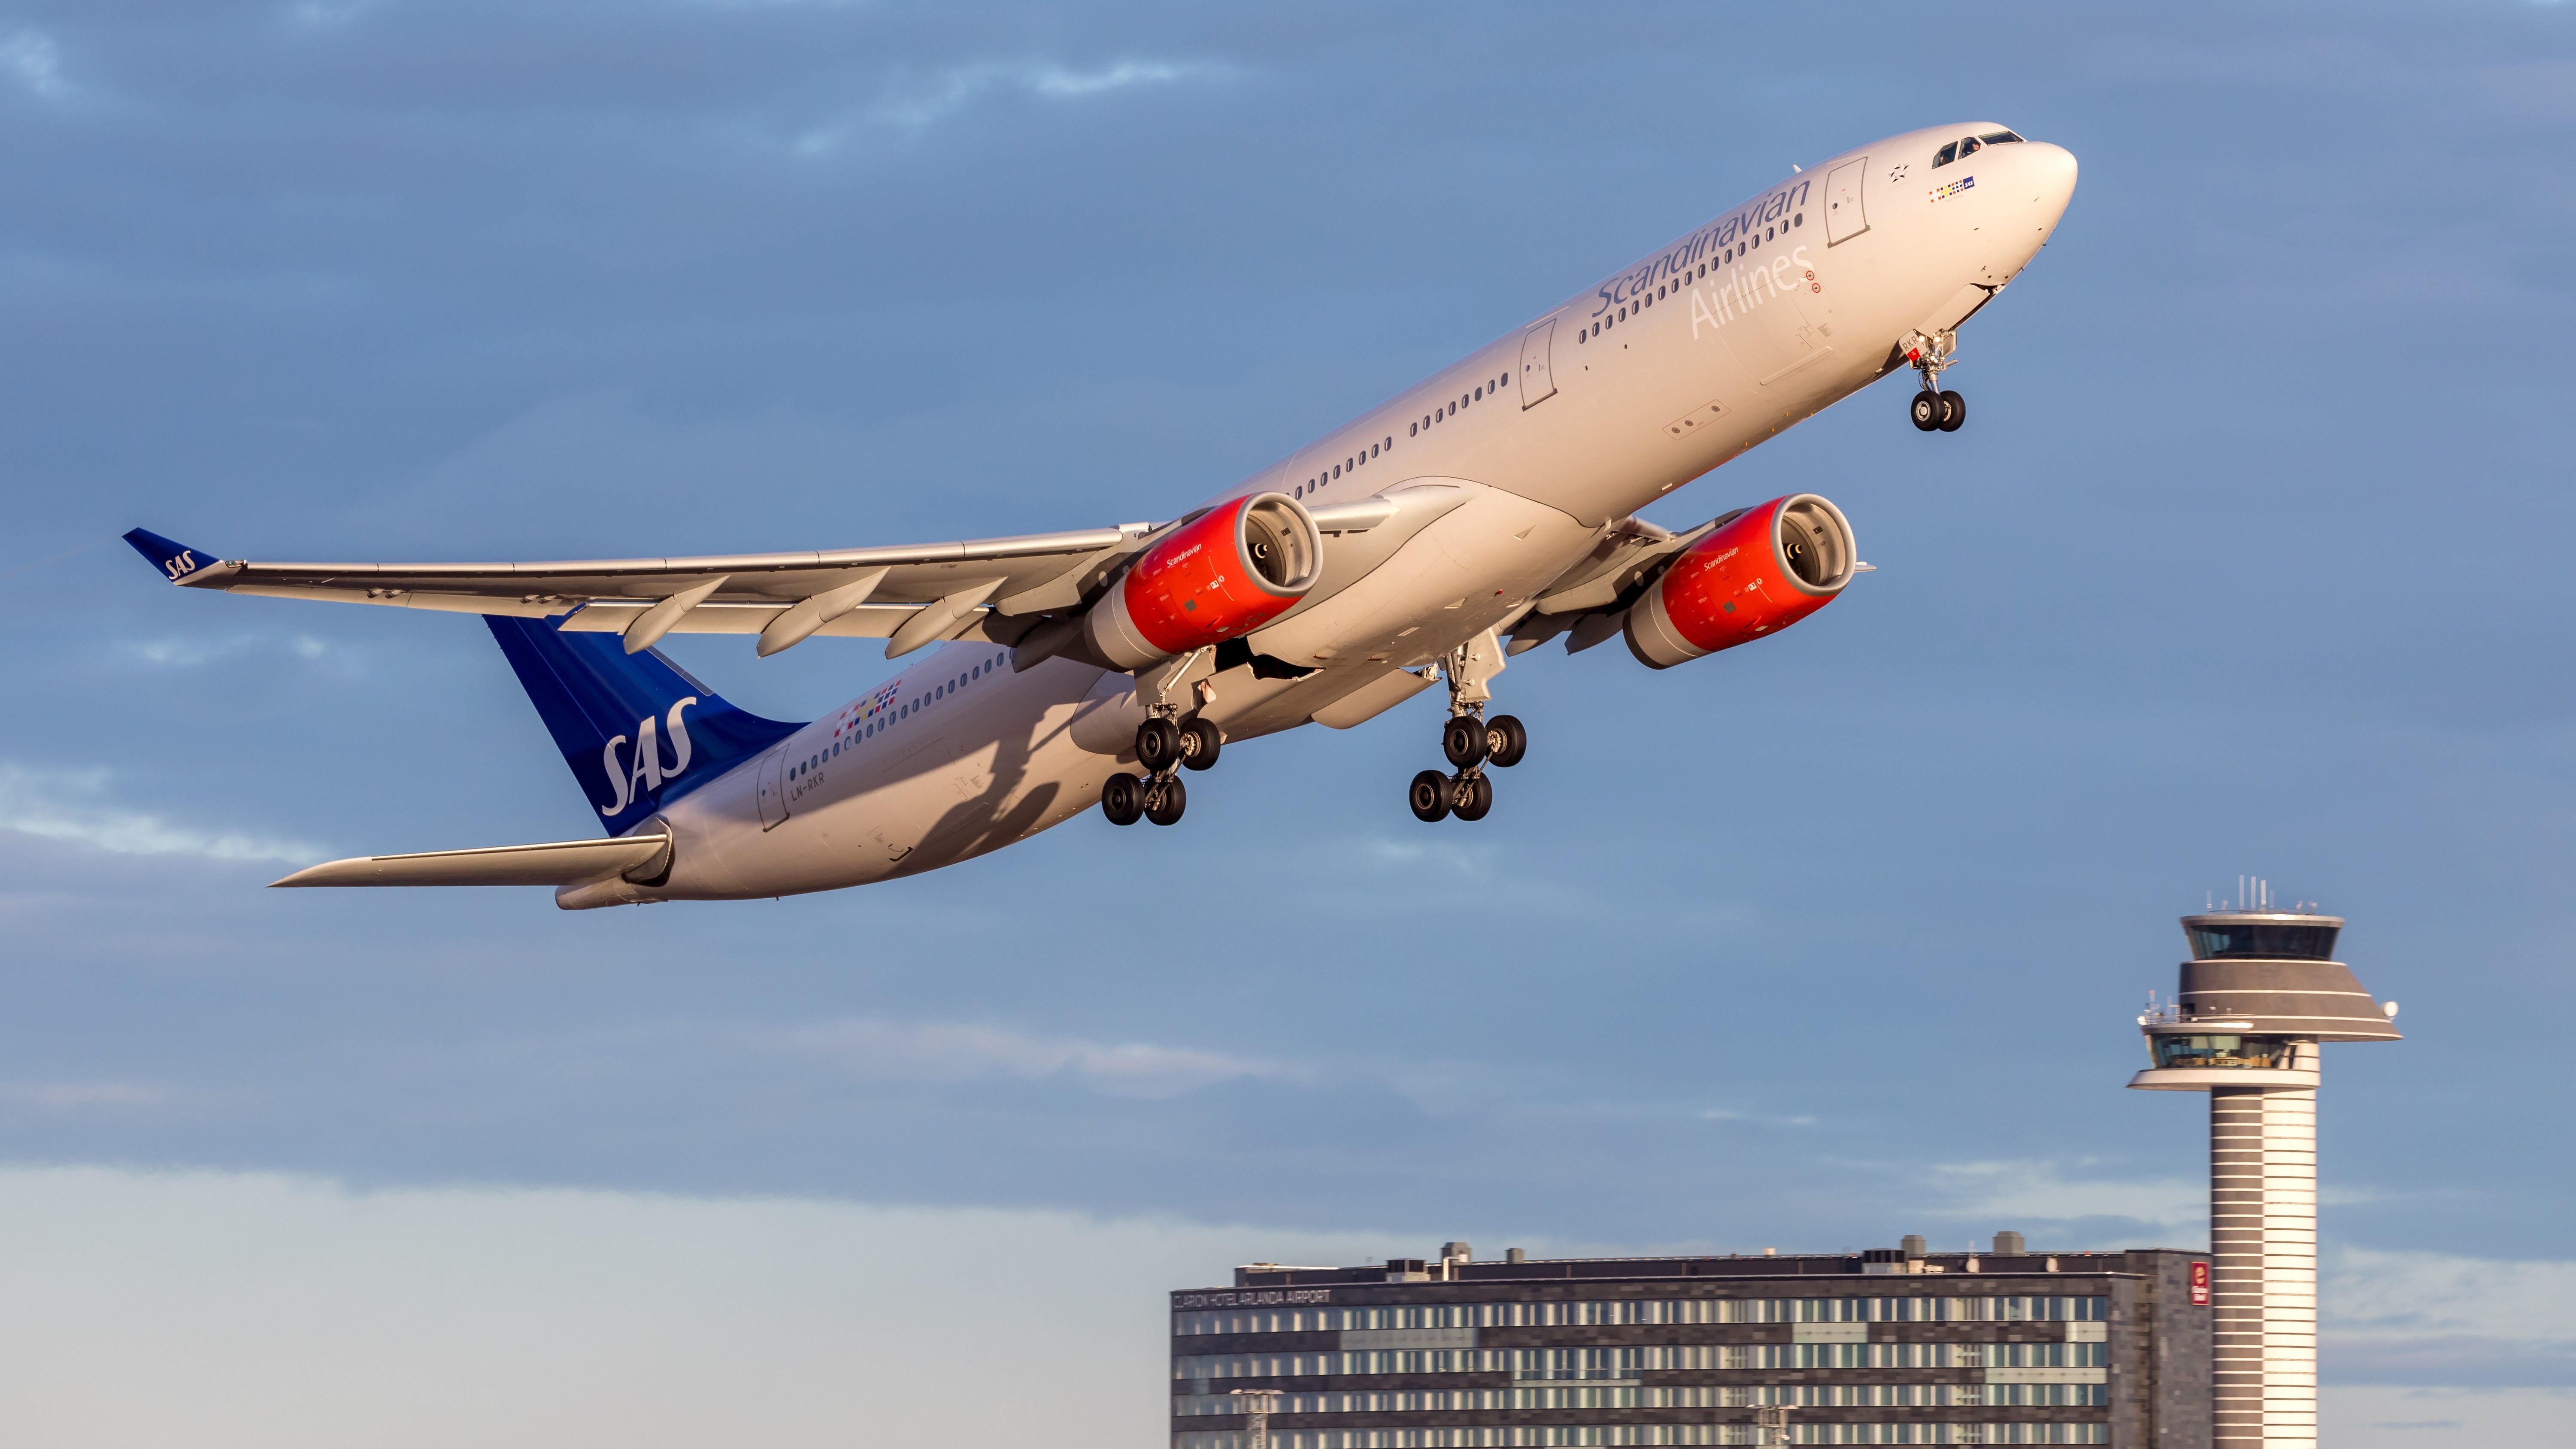 An SAS Airbus A330 Departing From Stockholm.